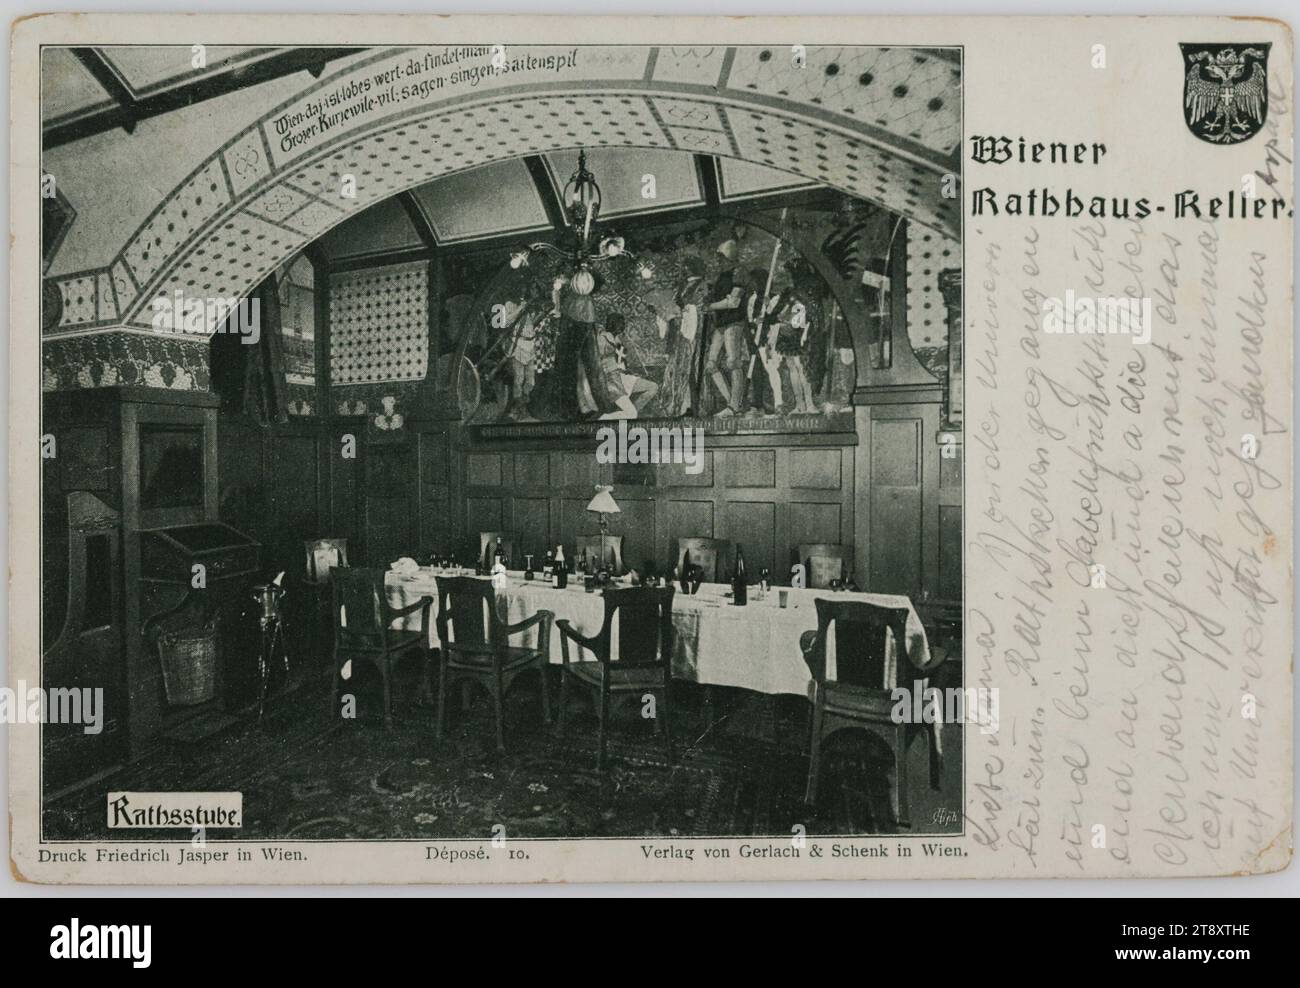 Vienna Town Hall Cellar. Rathsstube, Gerlach & Schenk (Verlag) (1874-1901), Producer, Friedrich Jasper, Printer, 1899, coated paperboard, halftone print, Inscription, FROM, Vienna, TO, Selmeczbánya, Ober Ungarn, ADDRESS, Wohlgeboren, Frau [Name], Selmeczbánya, Ober Ungarn, MESSAGE, Liebe Mama, I went from the university to the cellar of the town hall and sitting at the fork breakfast thinking of you and the dear ones, I inform you that I will go to the university again at 11 o'clock Handkus, Arpad, Hotel and Restaurant Industry, Media and Communication, Postcards with transliteration Stock Photo